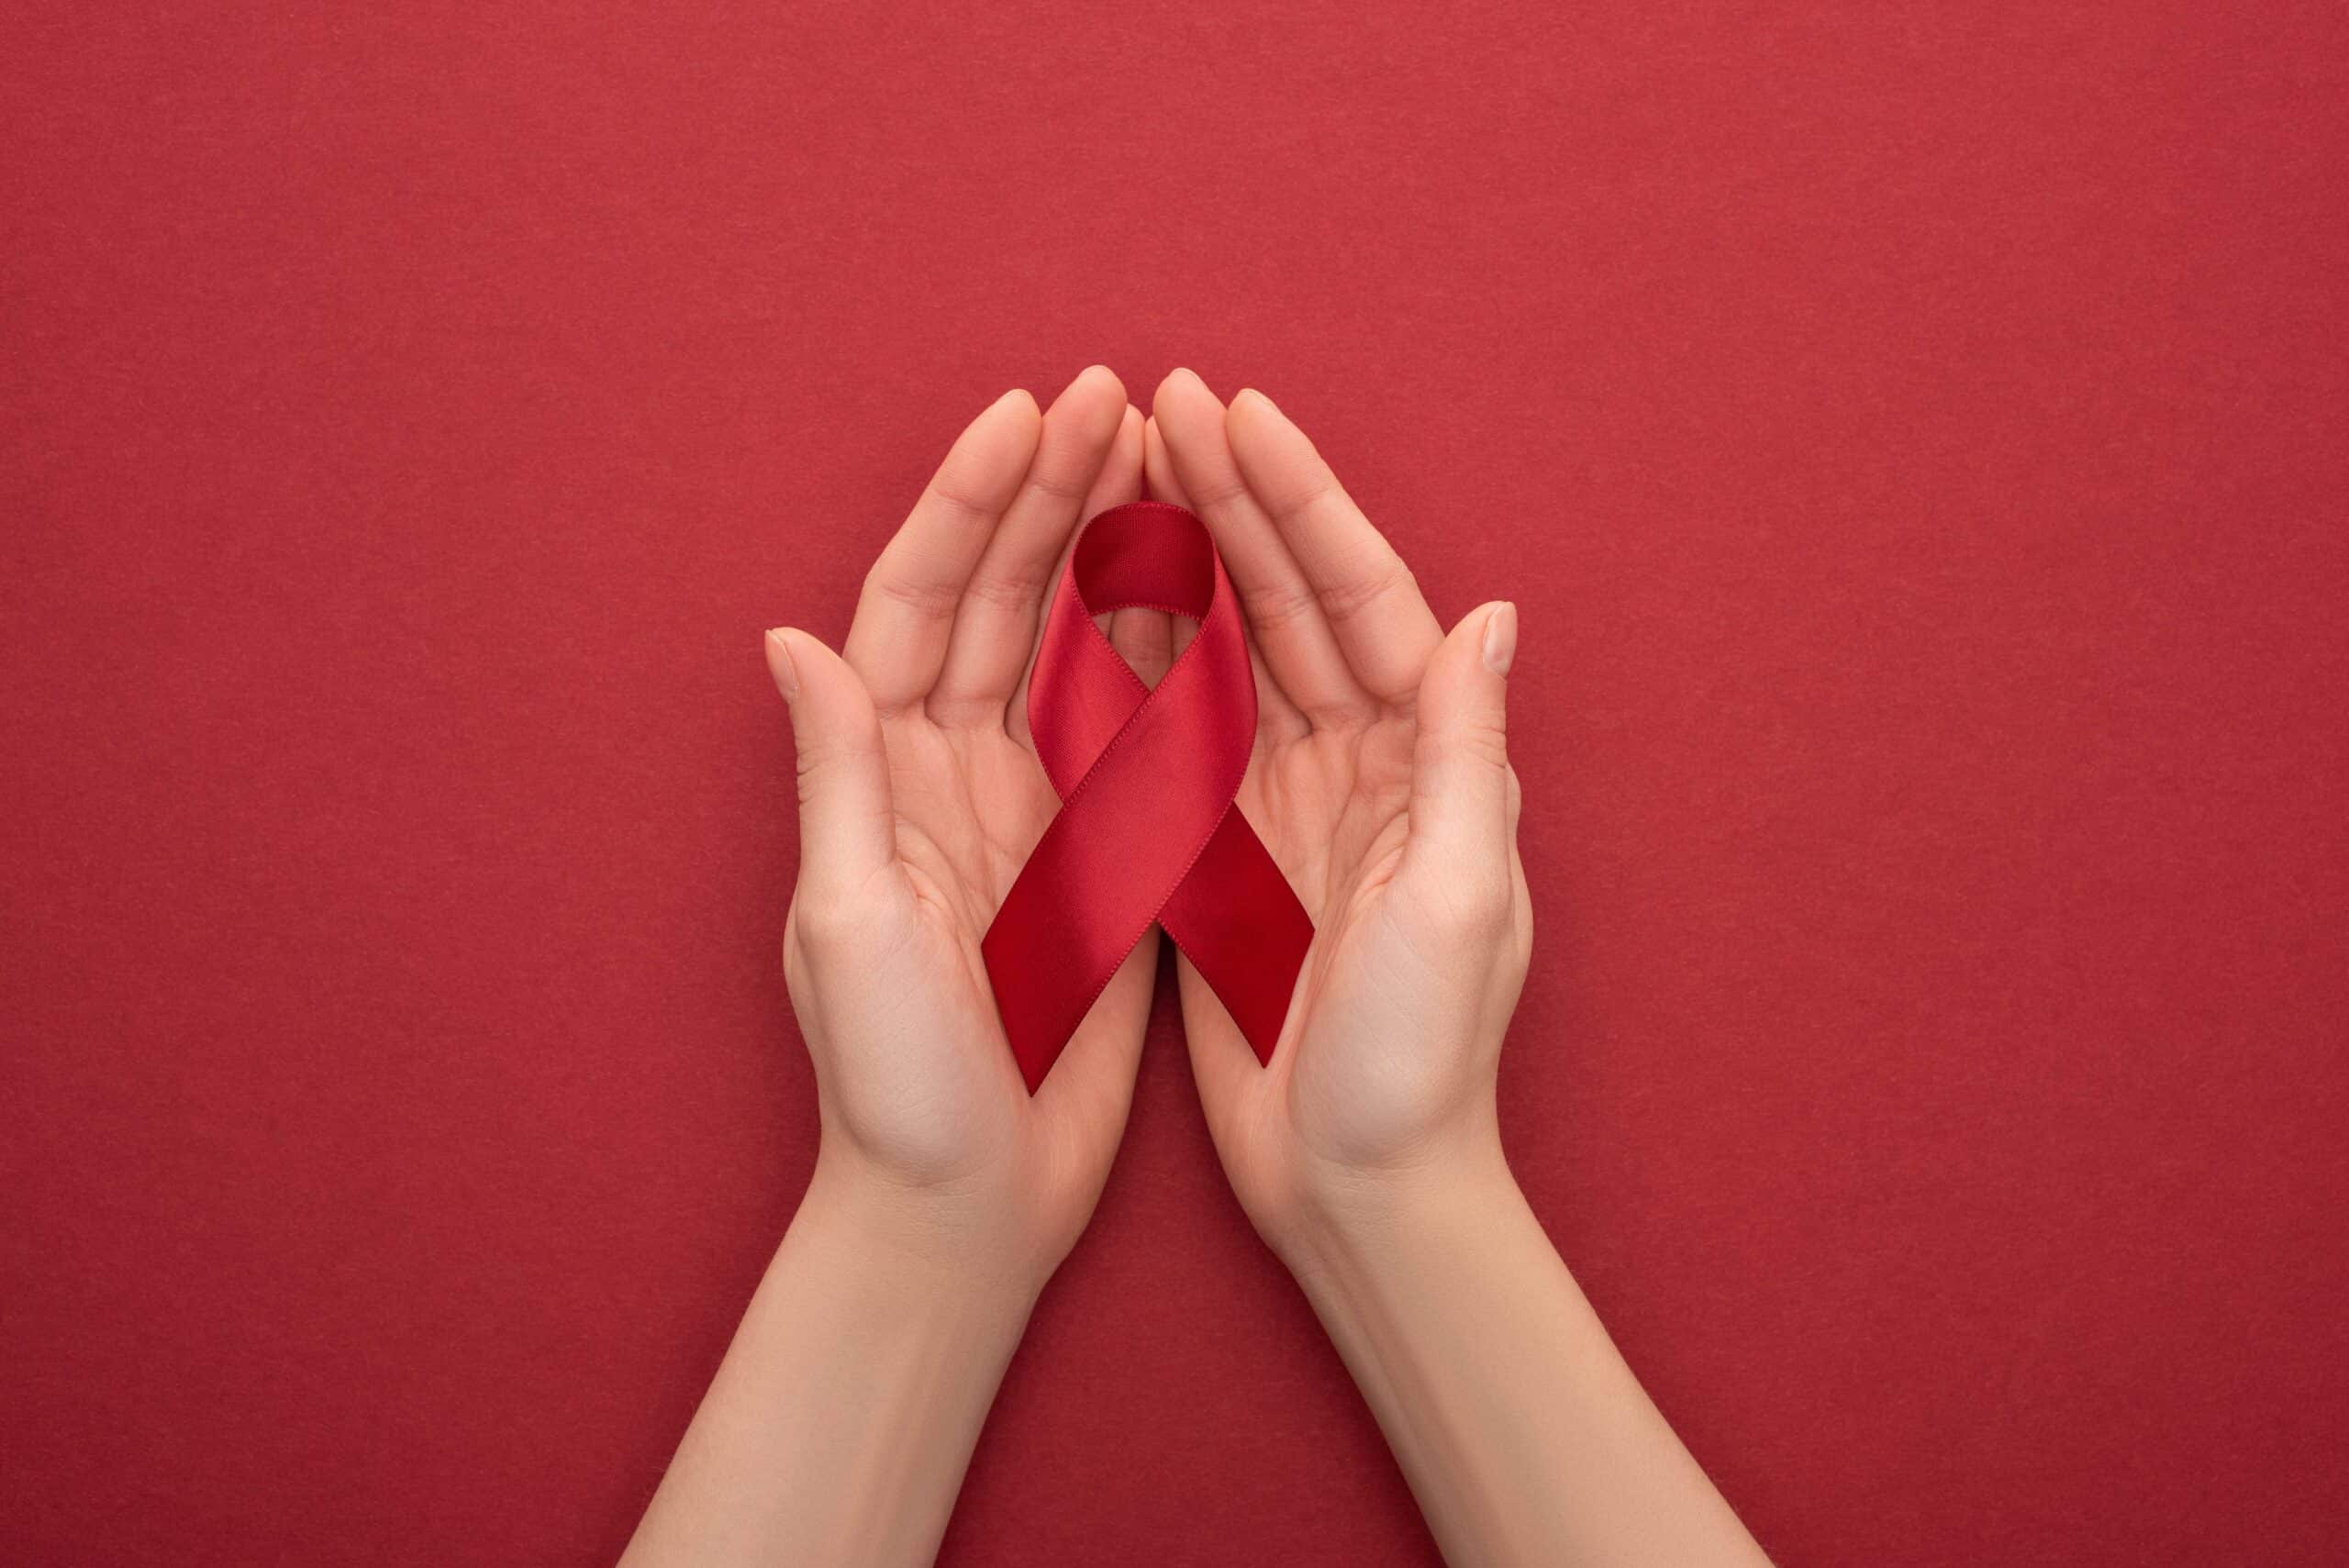 Hands holding HIV awareness ribbon, red background